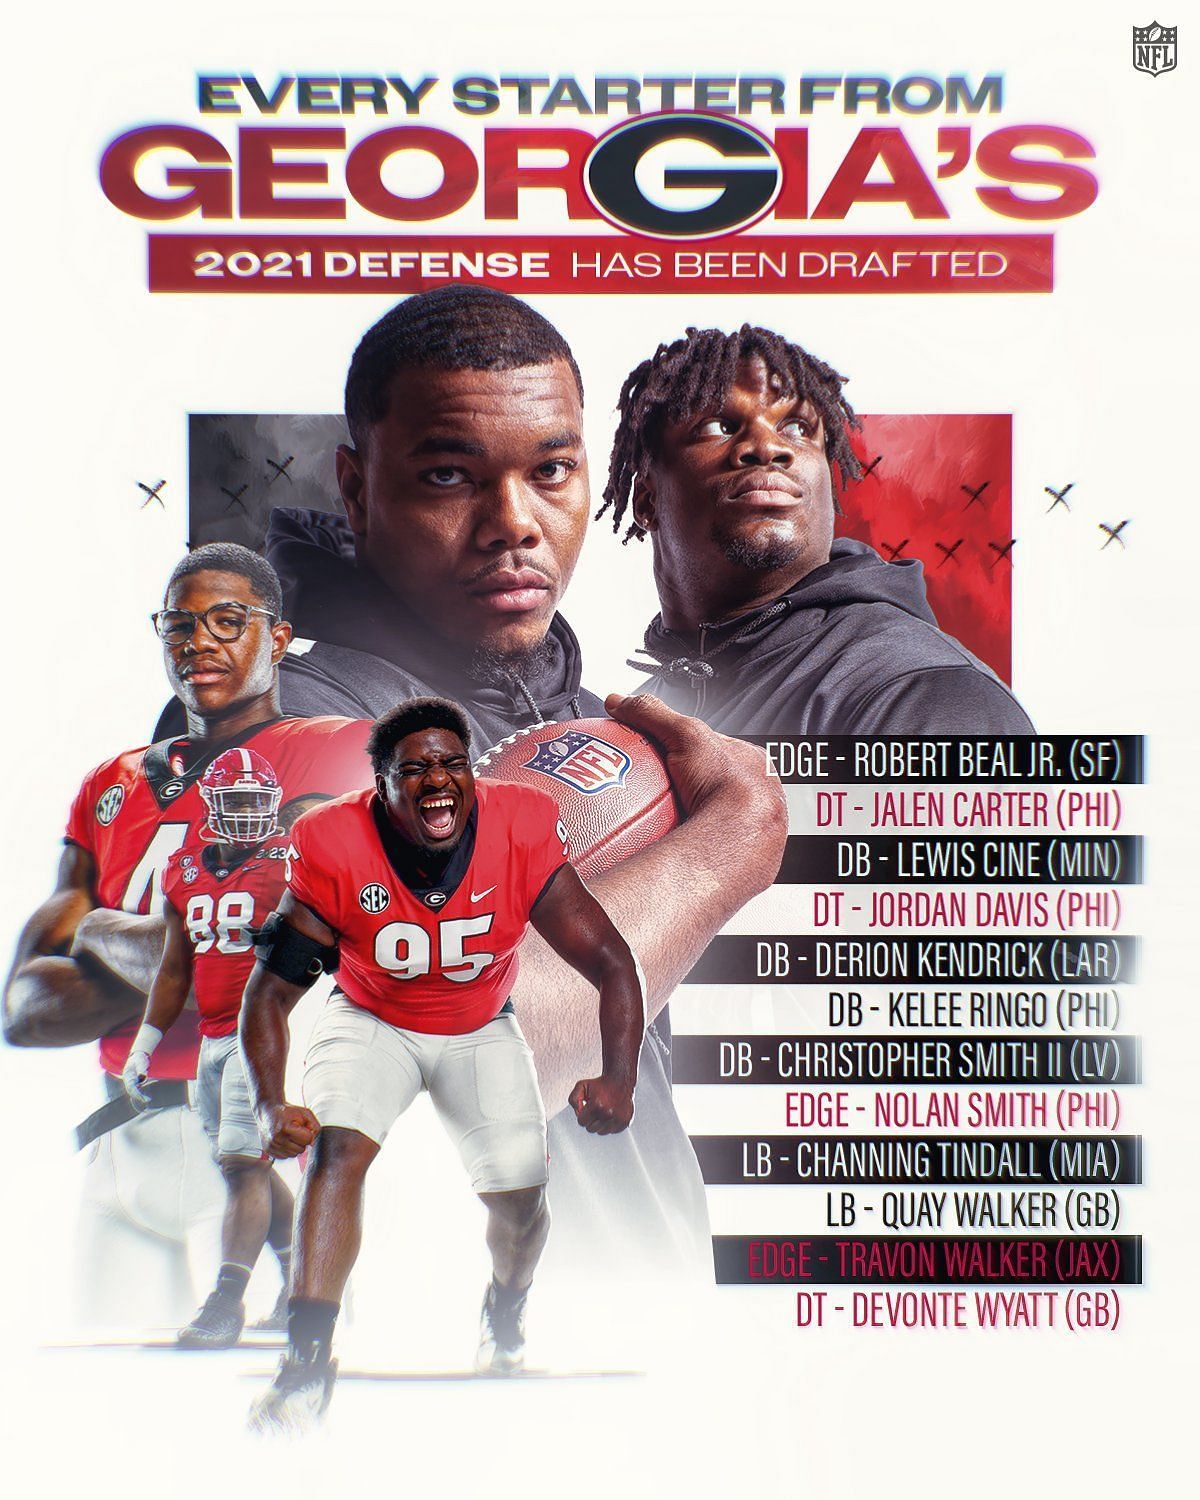 Georgia is trying to win its third consecutive national title.